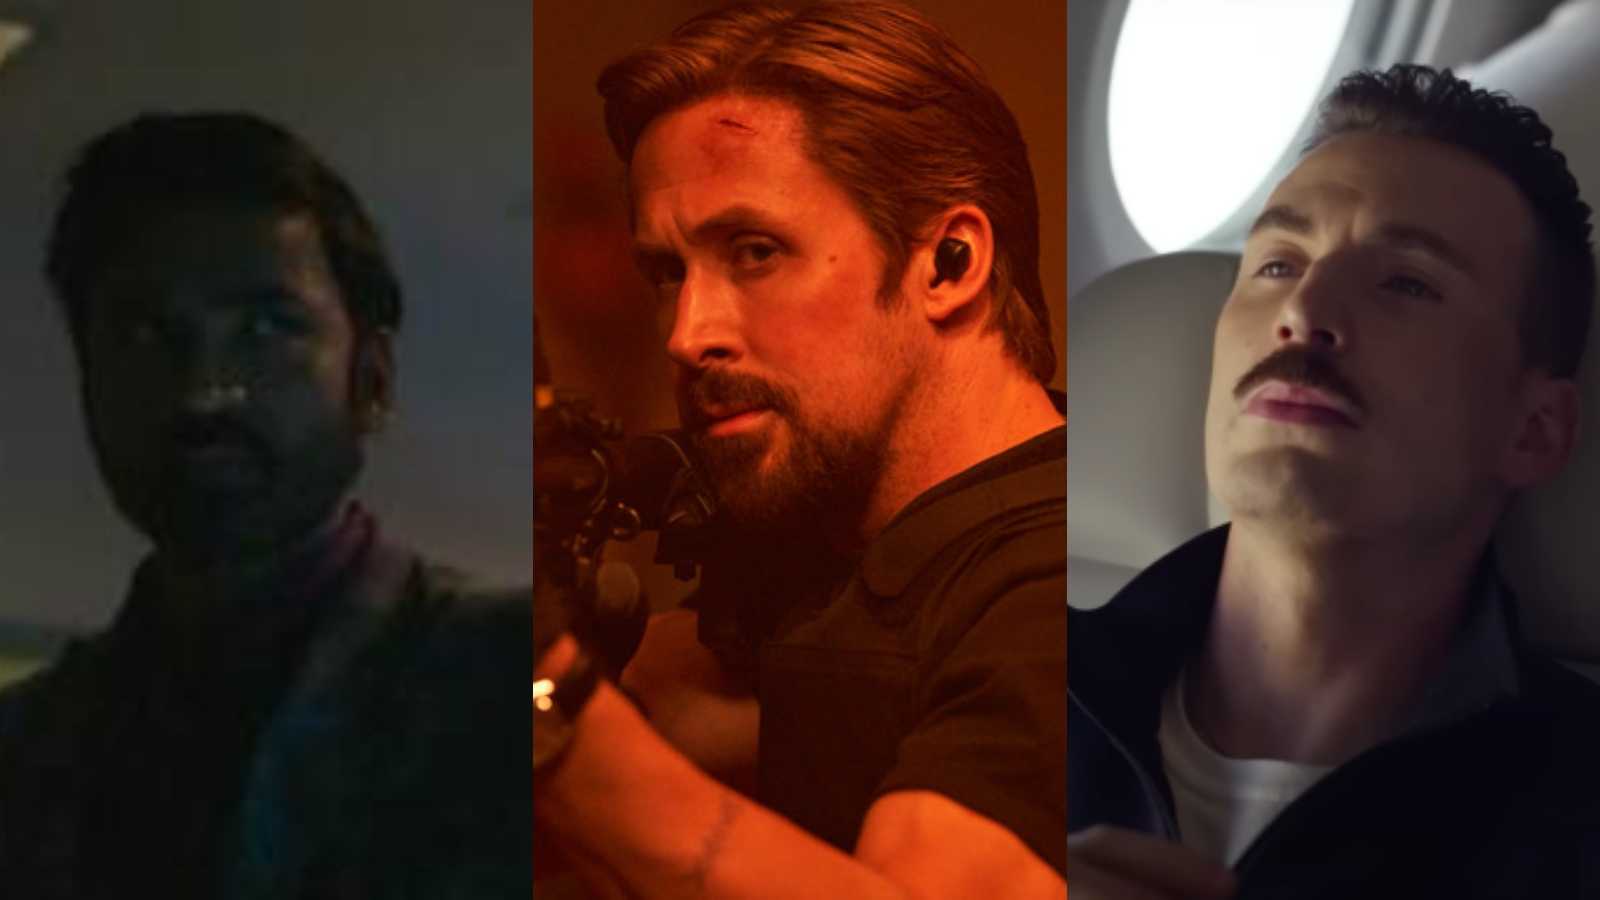 The Gray Man Trailer  - Check out Ryan Gosling battle it out with Chris Evans and Dhanush in this action-packed trailer